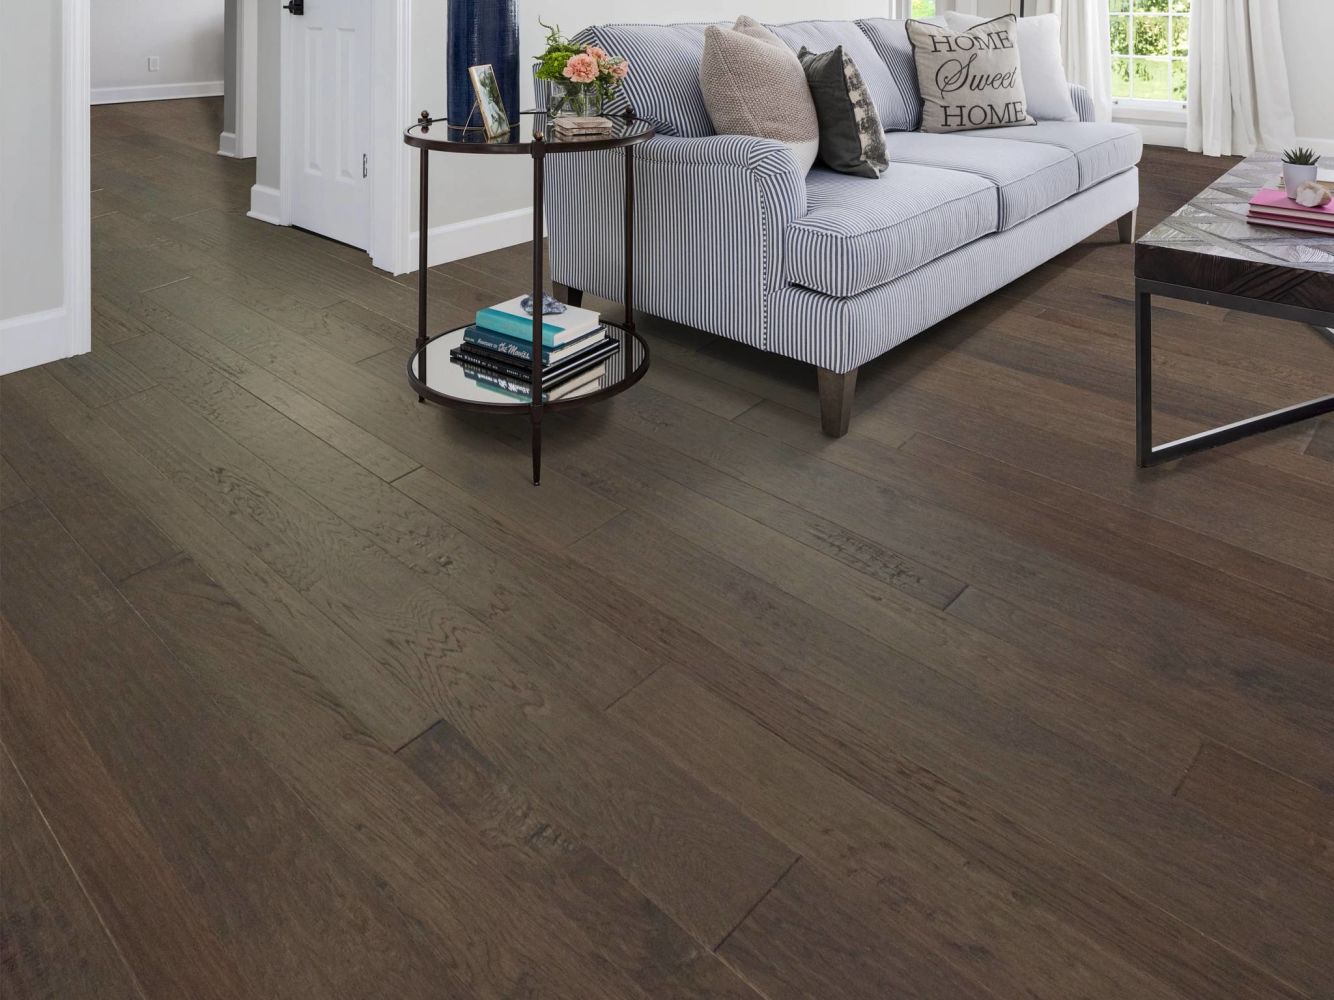 Shaw Floors Repel Hardwood Pebble Hill Mixed Width Shearling 07072_SW742